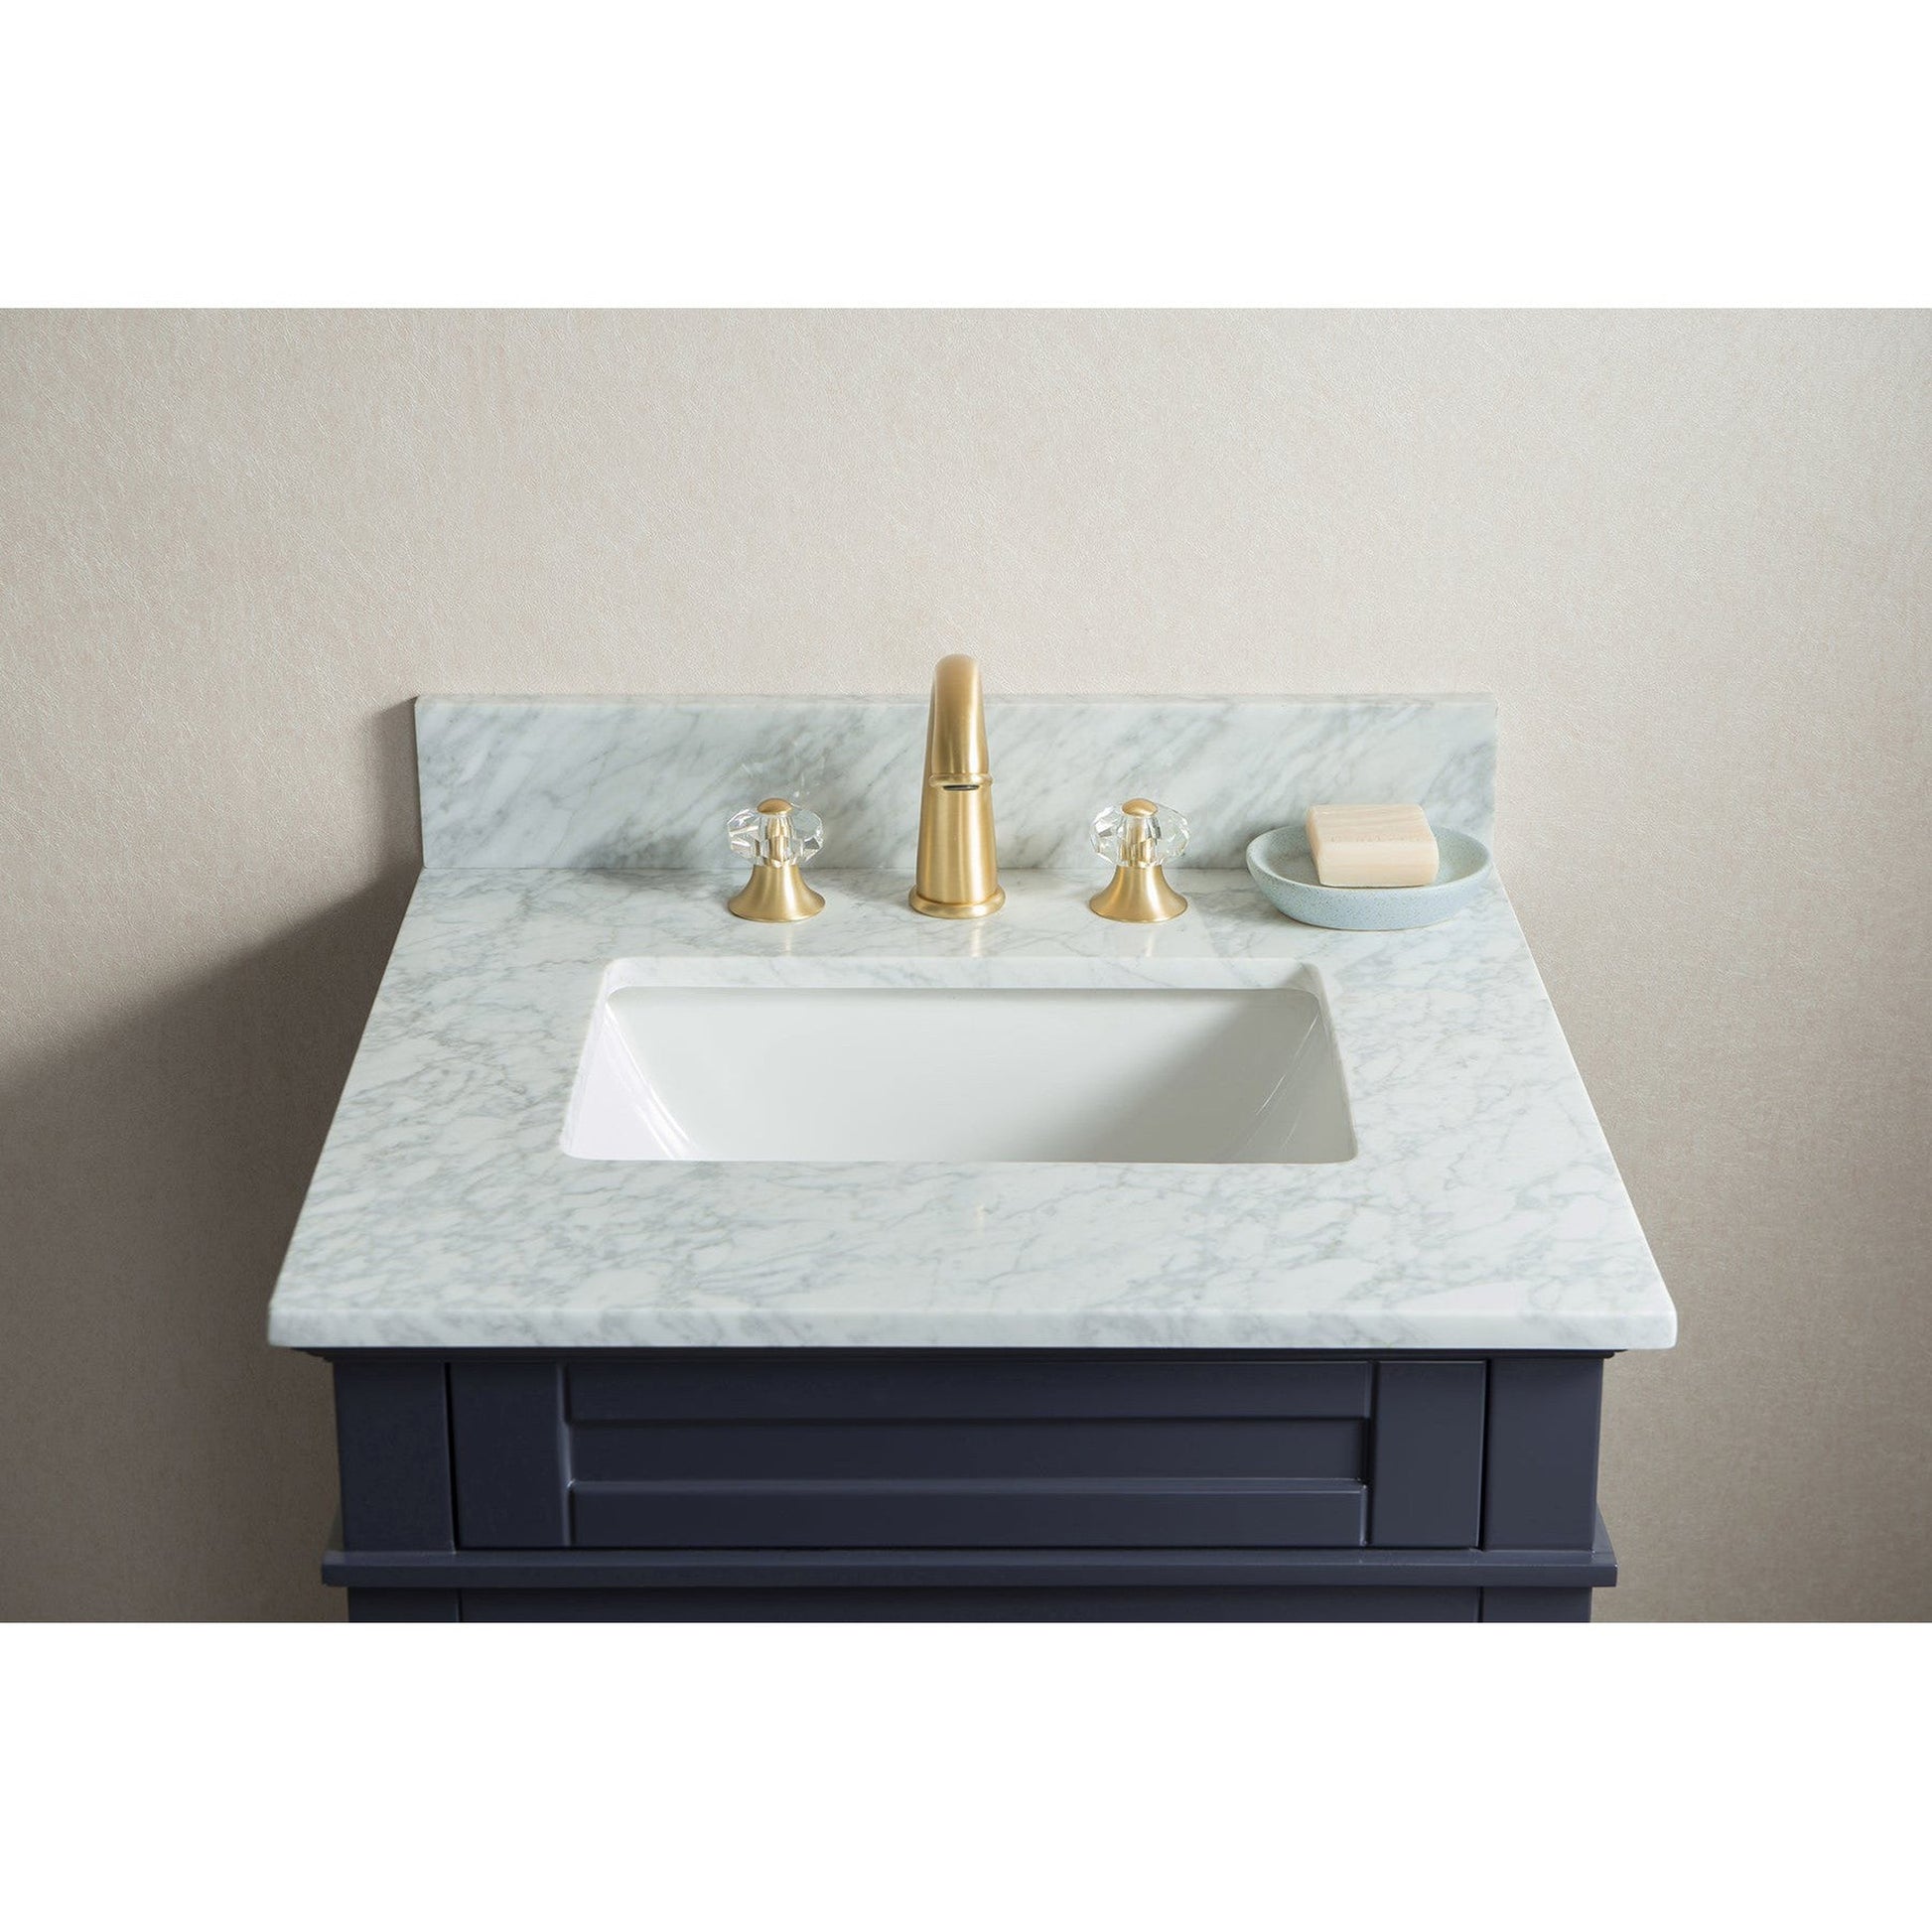 Legion Furniture 24" Navy Blue Freestanding Vanity With Carrara White Marble Top and White Ceramic Sink